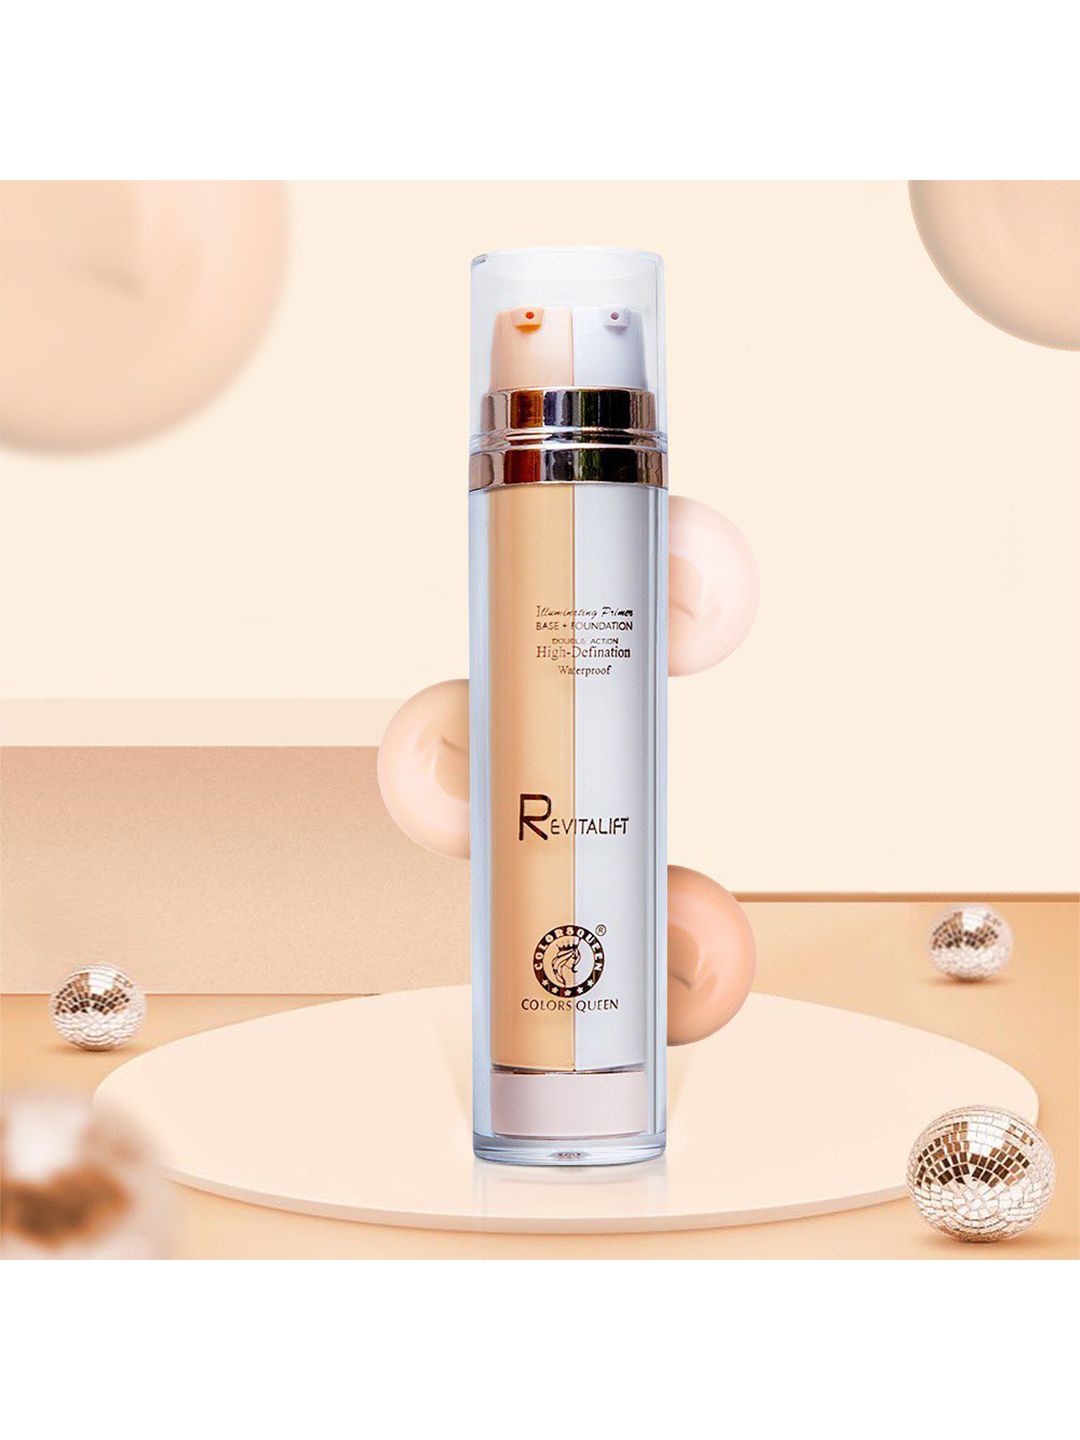 Colors Queen Revitalift 2 IN 1 Illuminating Base Primer + Foundation - 40ml - 02 Ivory Price in India